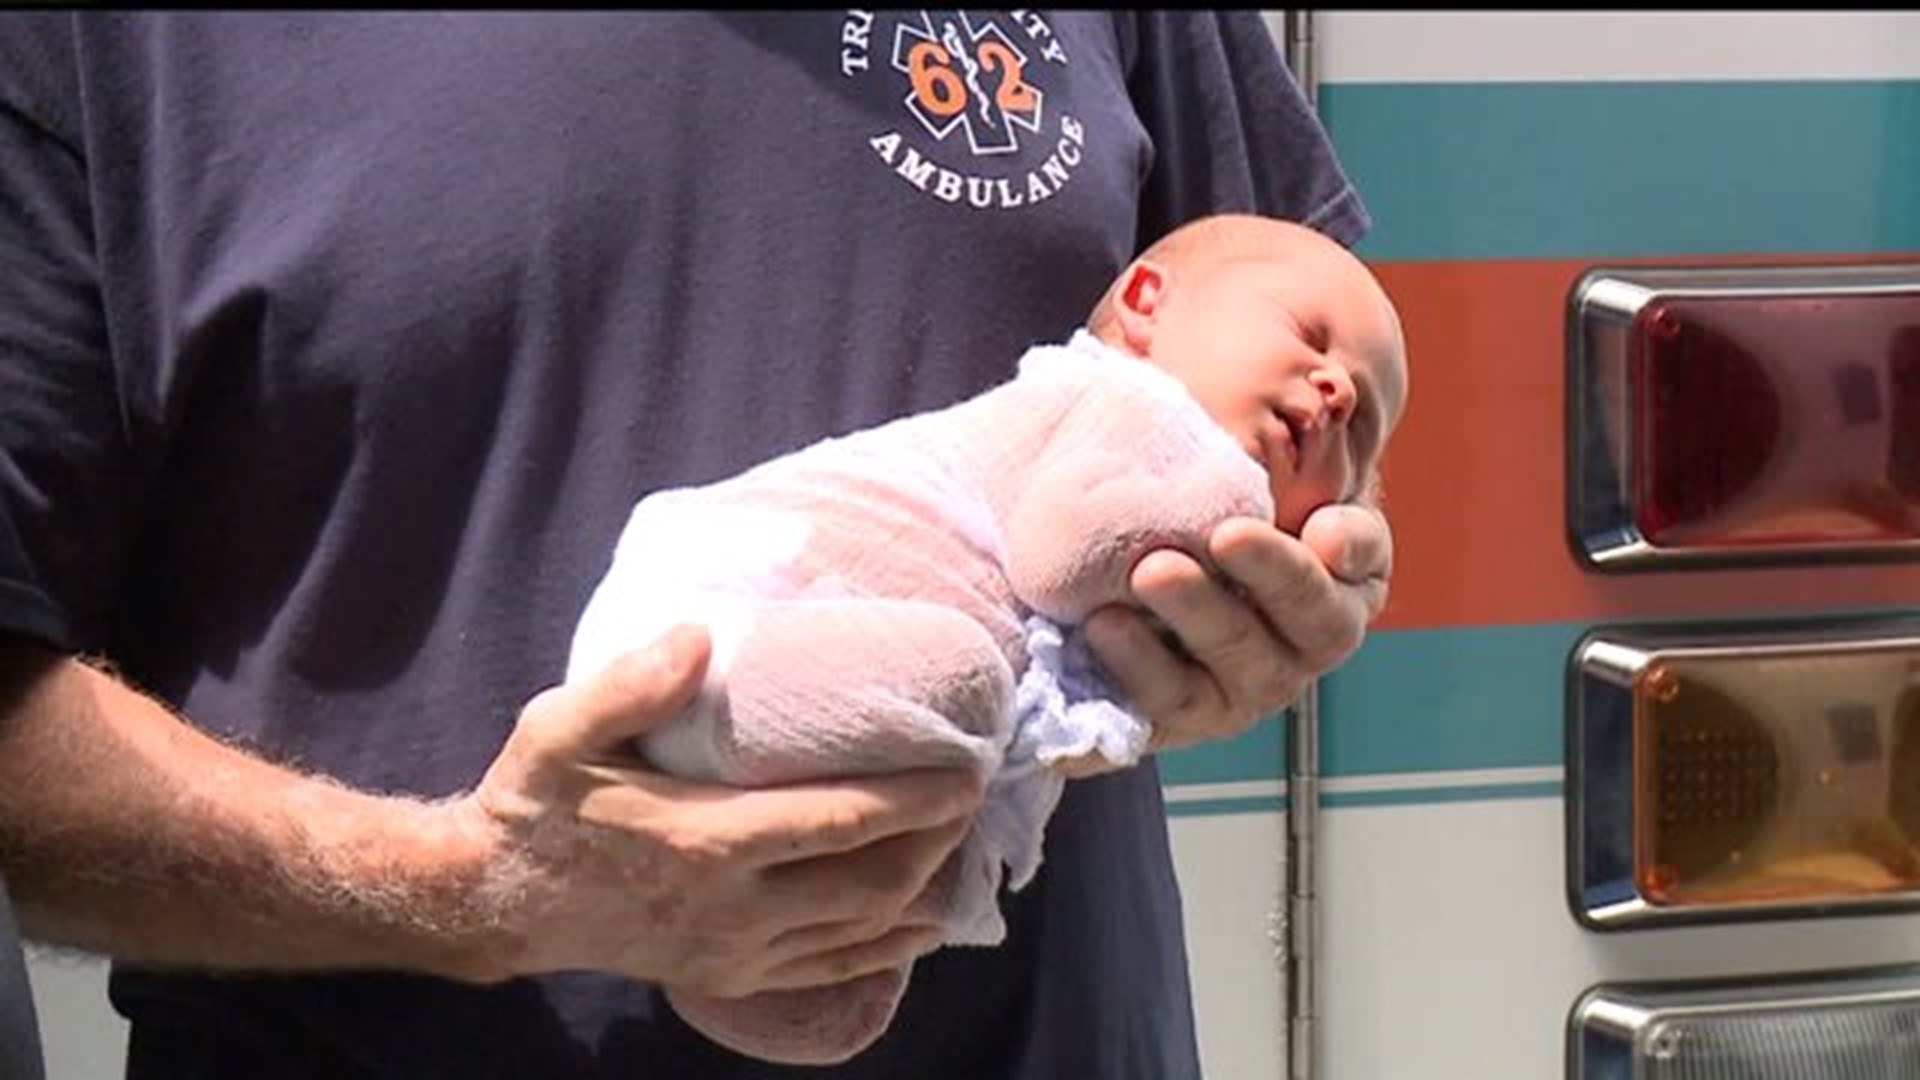 York County ambulance crew delivers baby inside vehicle